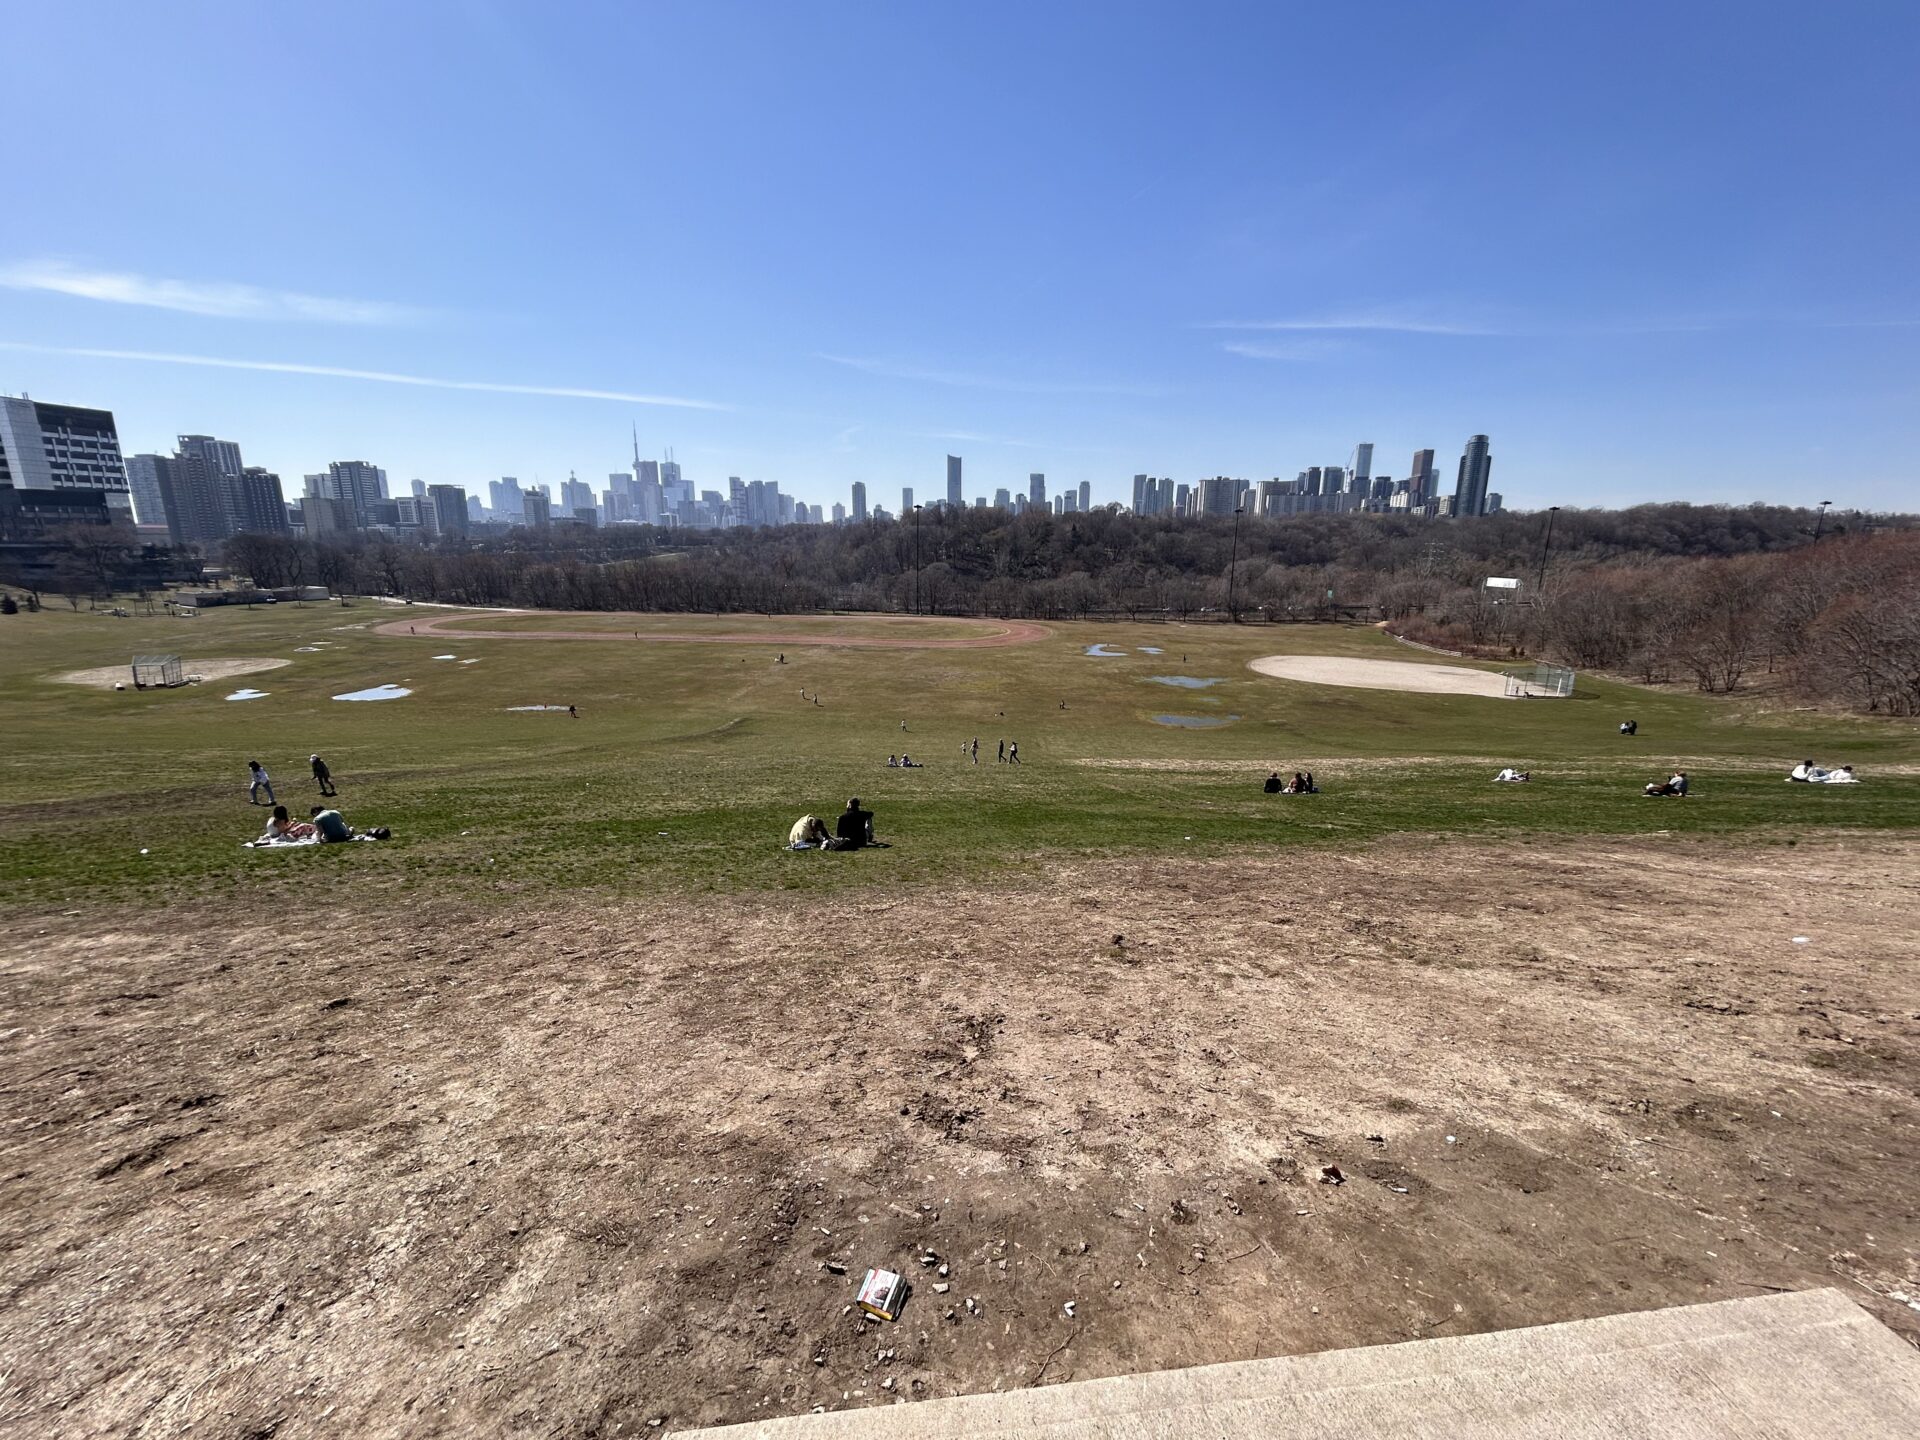 Broadview Hill is without snow and people sitting in the sun